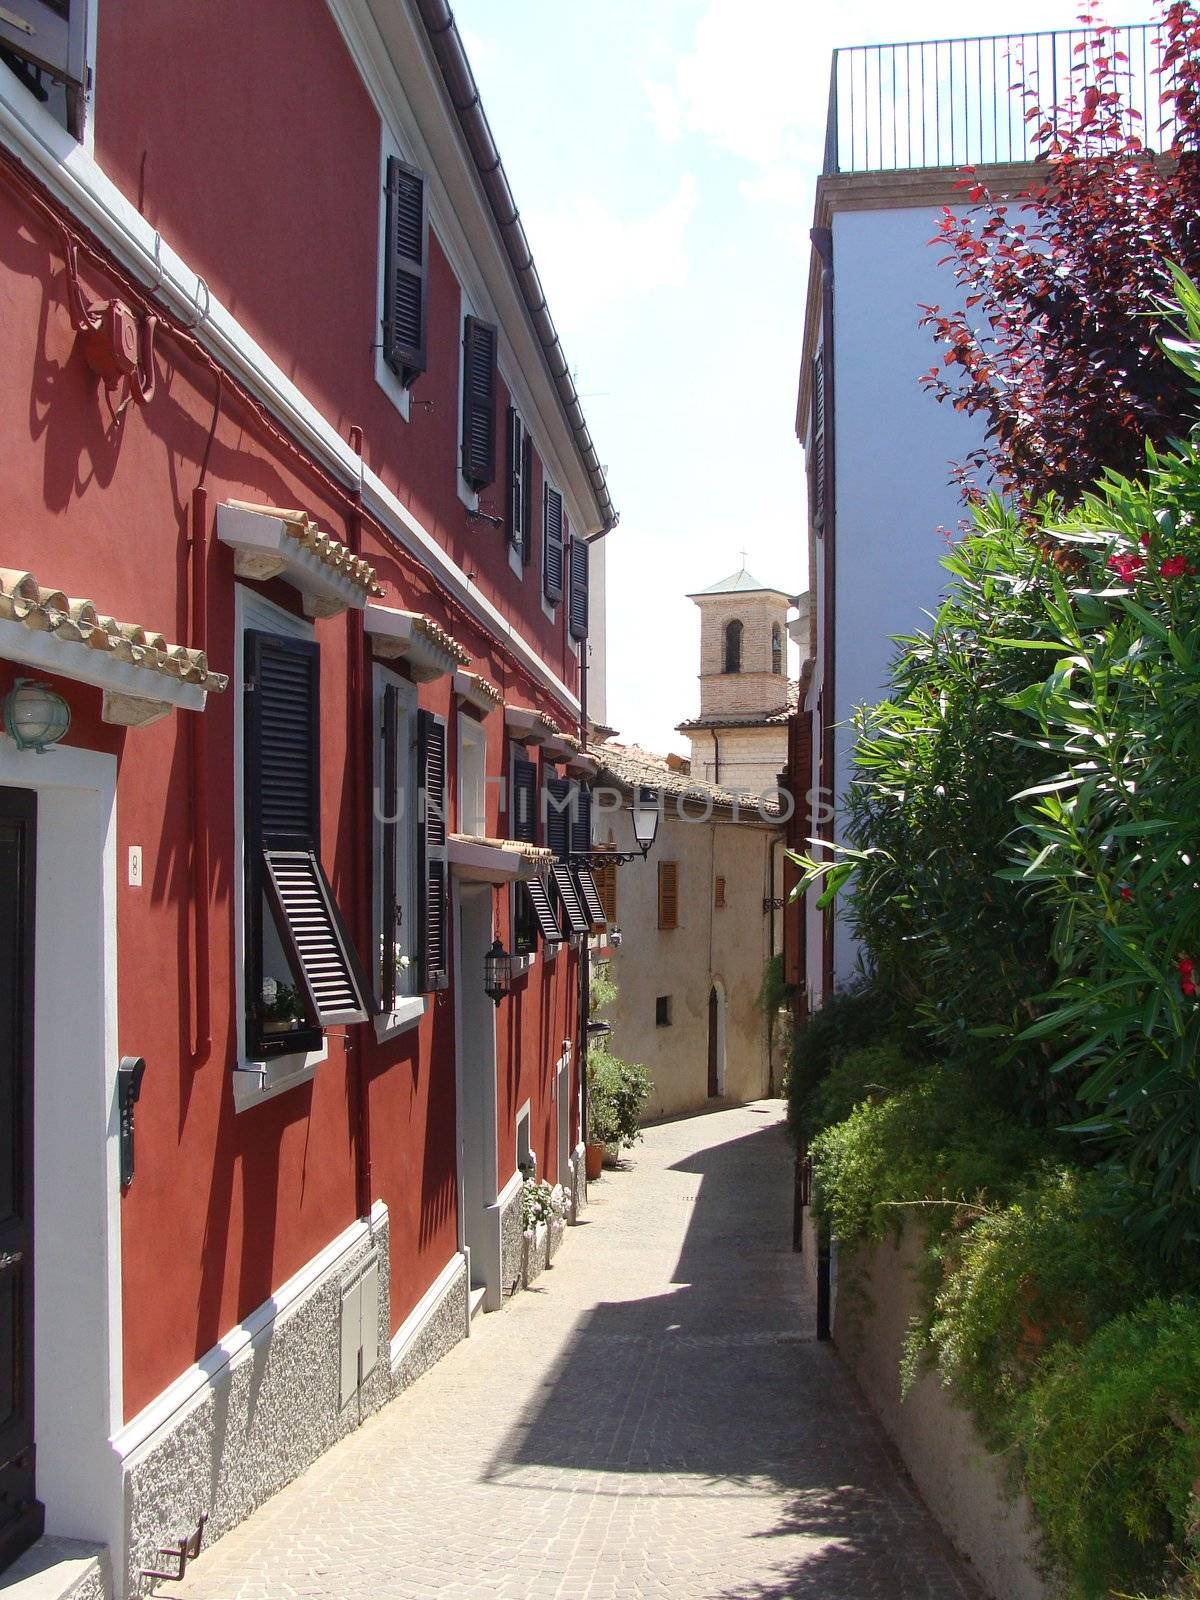 Narrow European street with the red house Italy